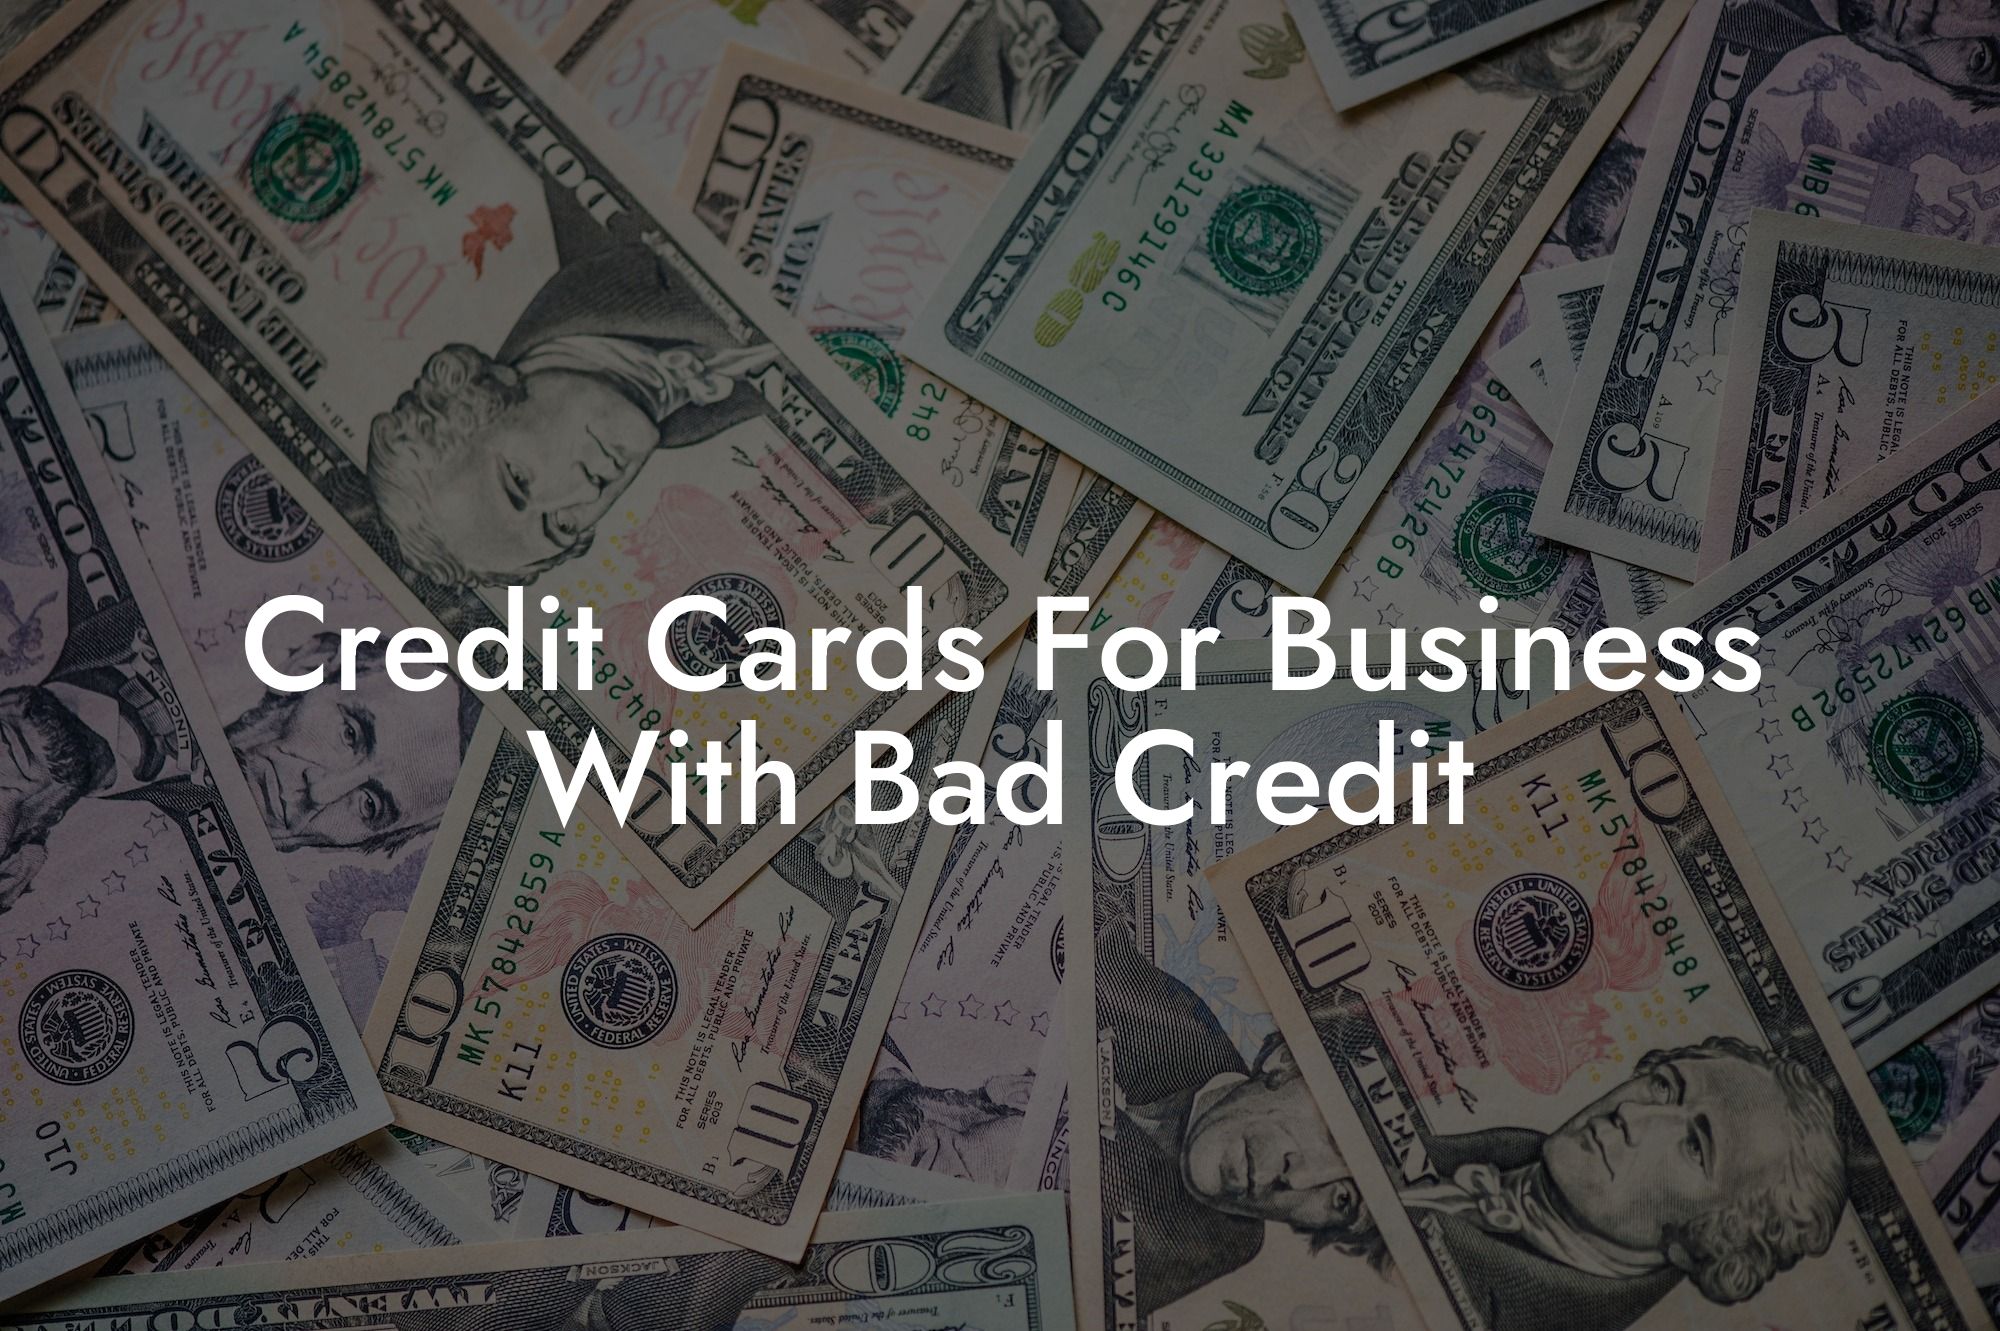 Credit Cards For Business With Bad Credit